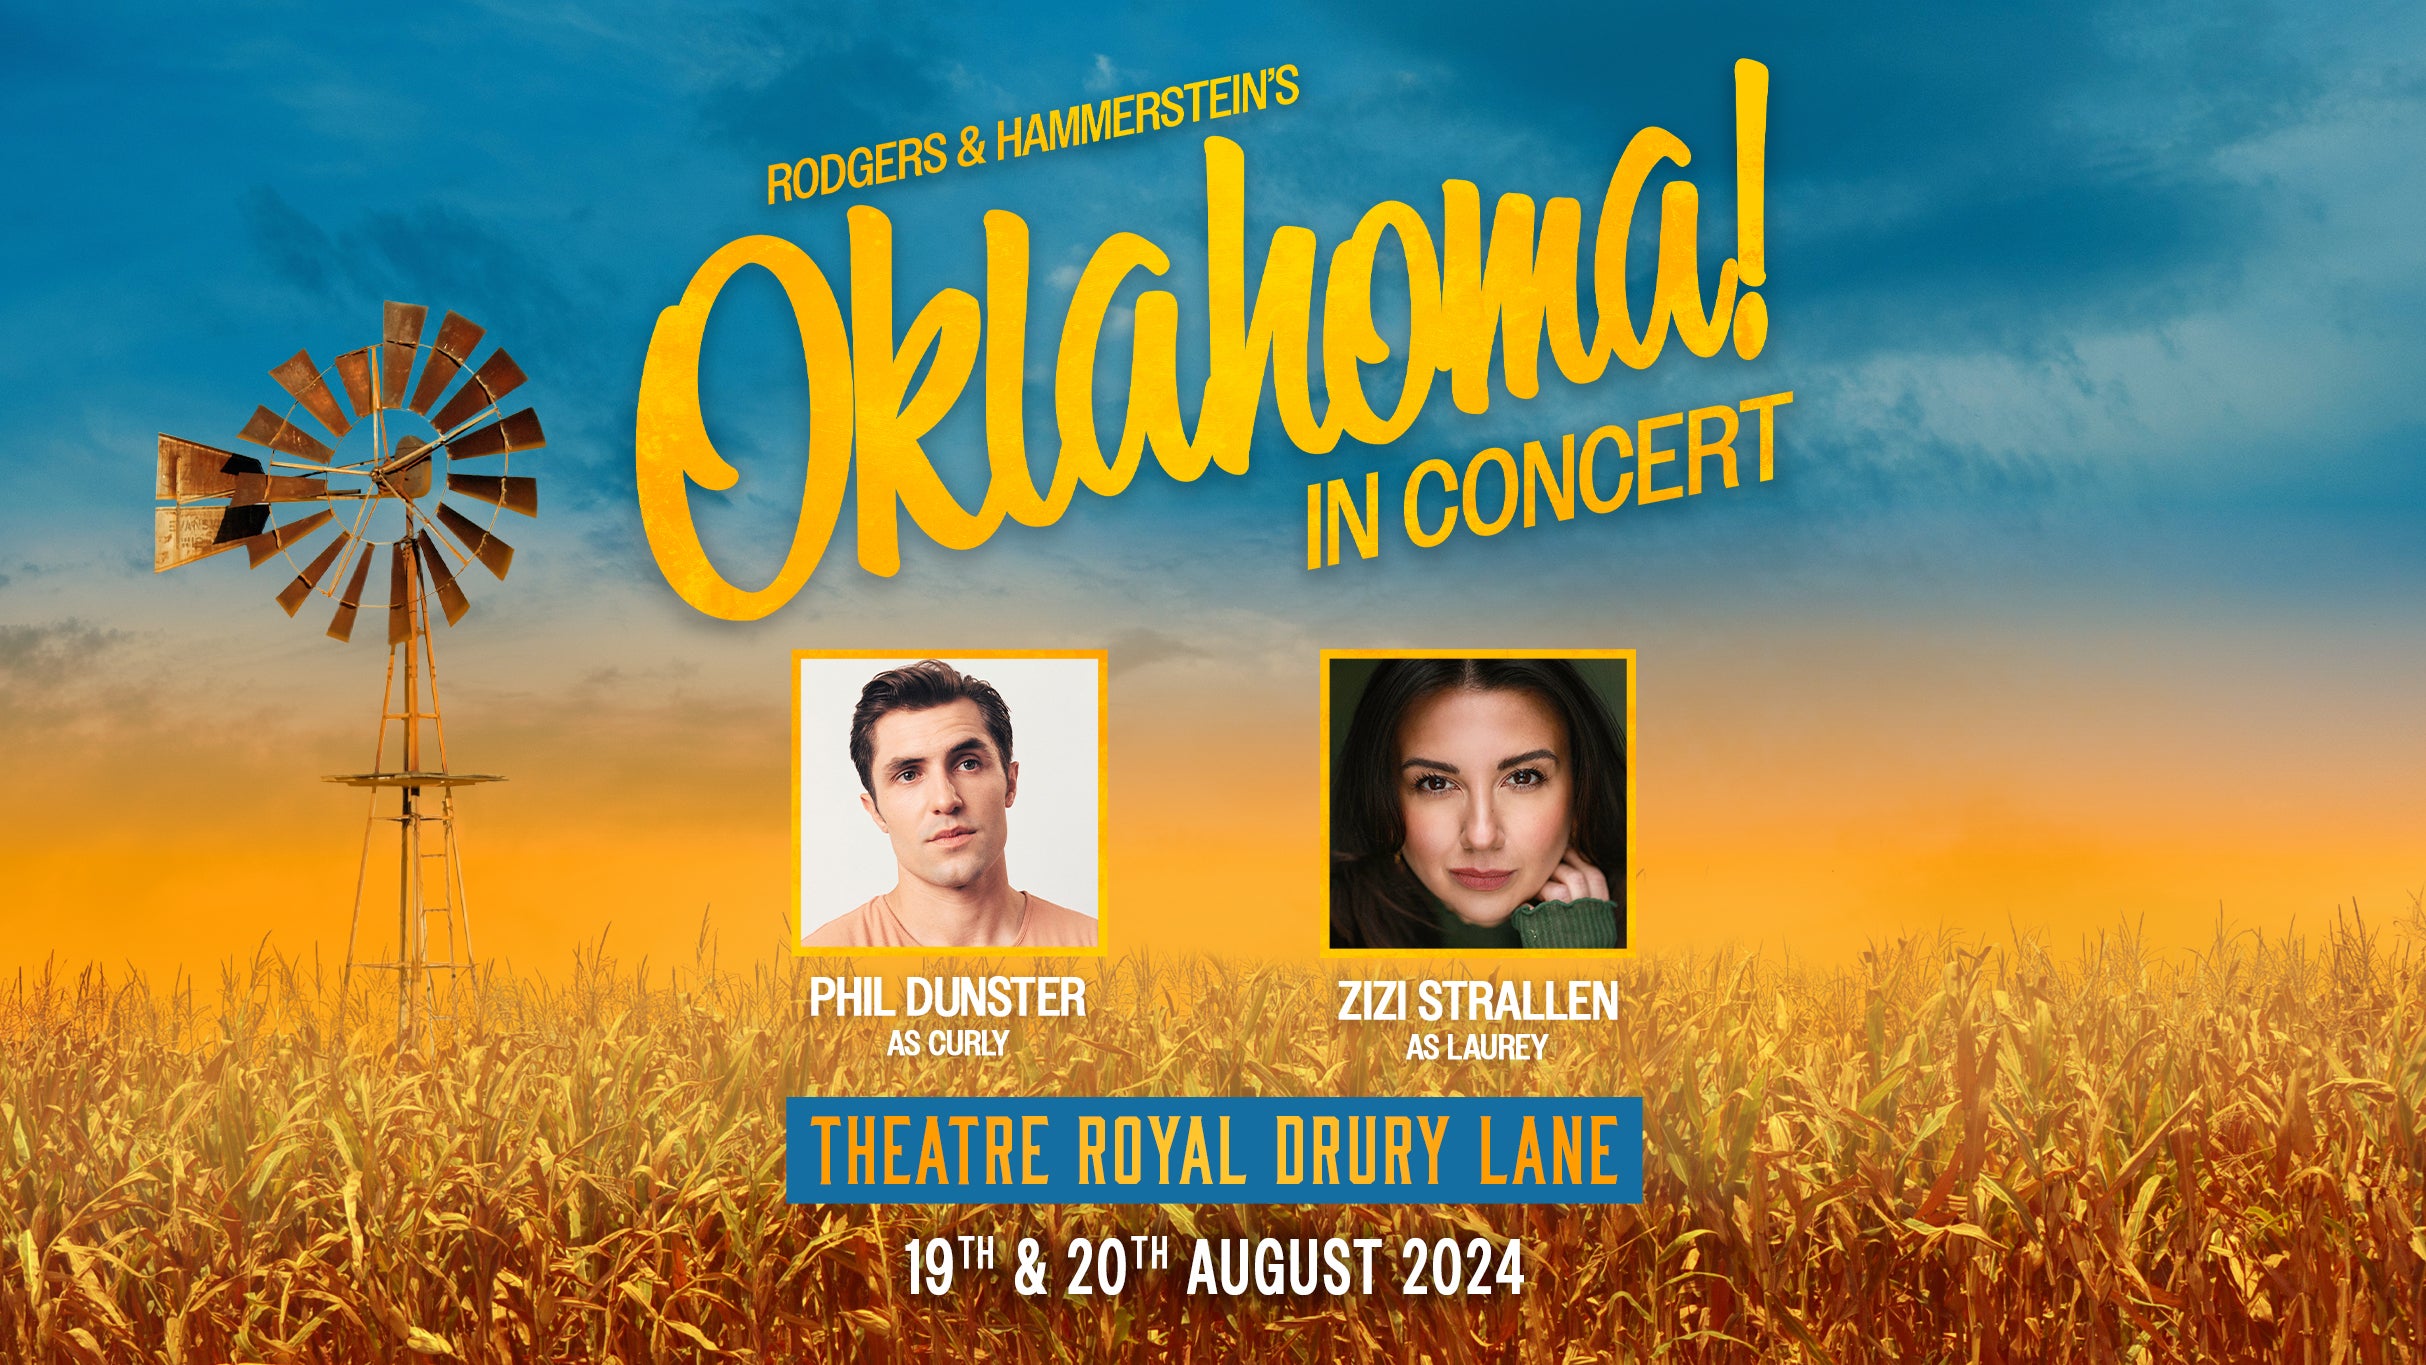 Rodgers & Hammerstein's Oklahoma! - In Concert presale passcode for genuine tickets in London